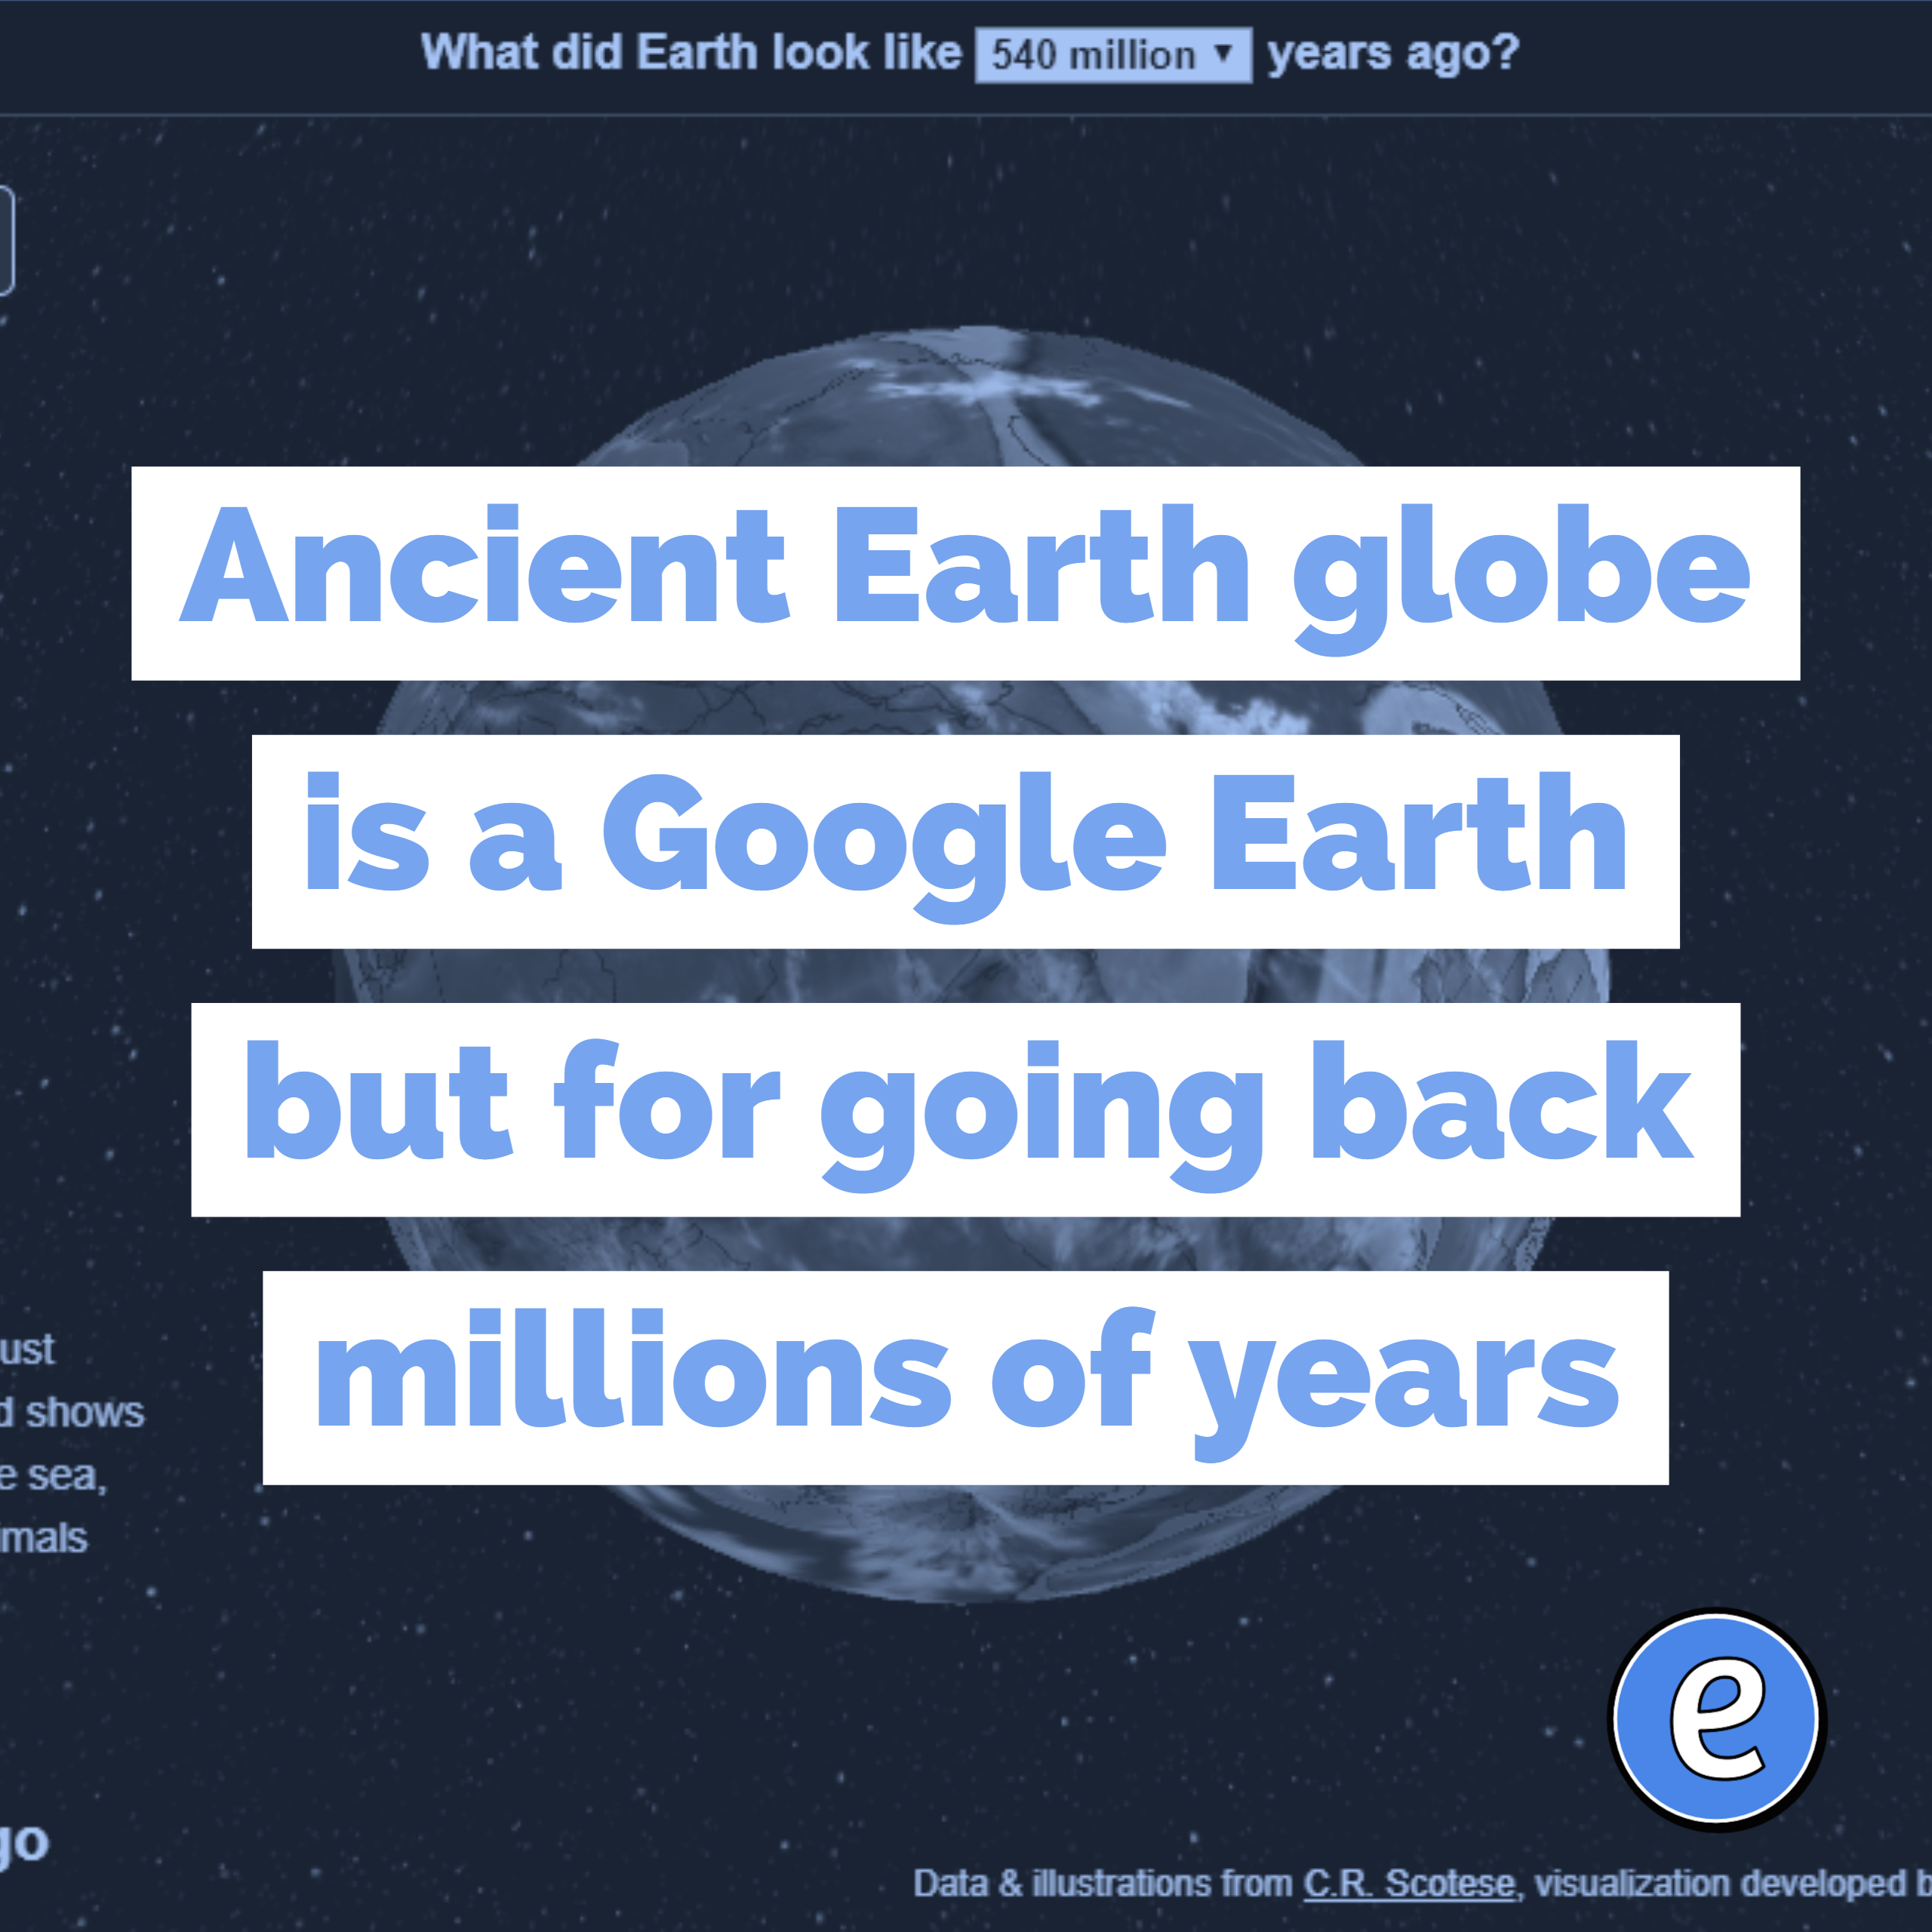 Ancient Earth globe is a Google Earth but for going back millions of years